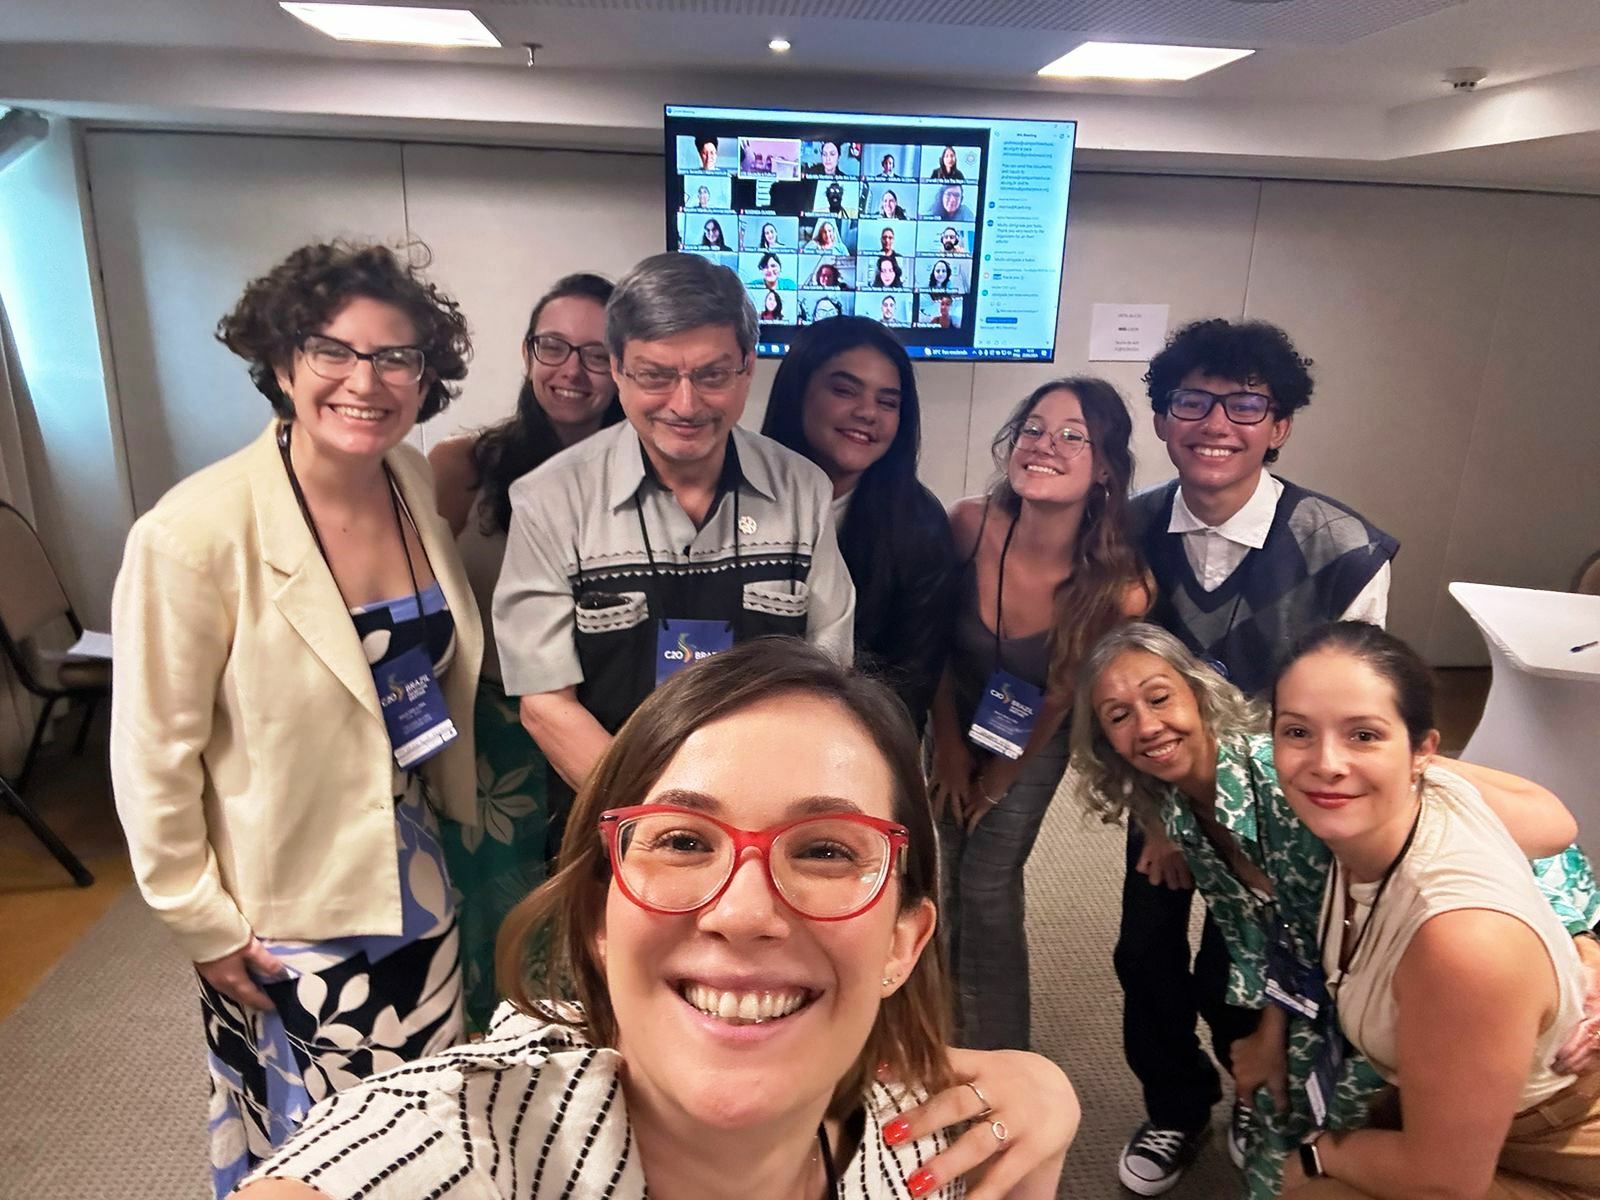 Group of nine cheerful people taking a selfie at the "C20-2024 Brazil" education and culture session, with a screen displaying additional participants in the background.